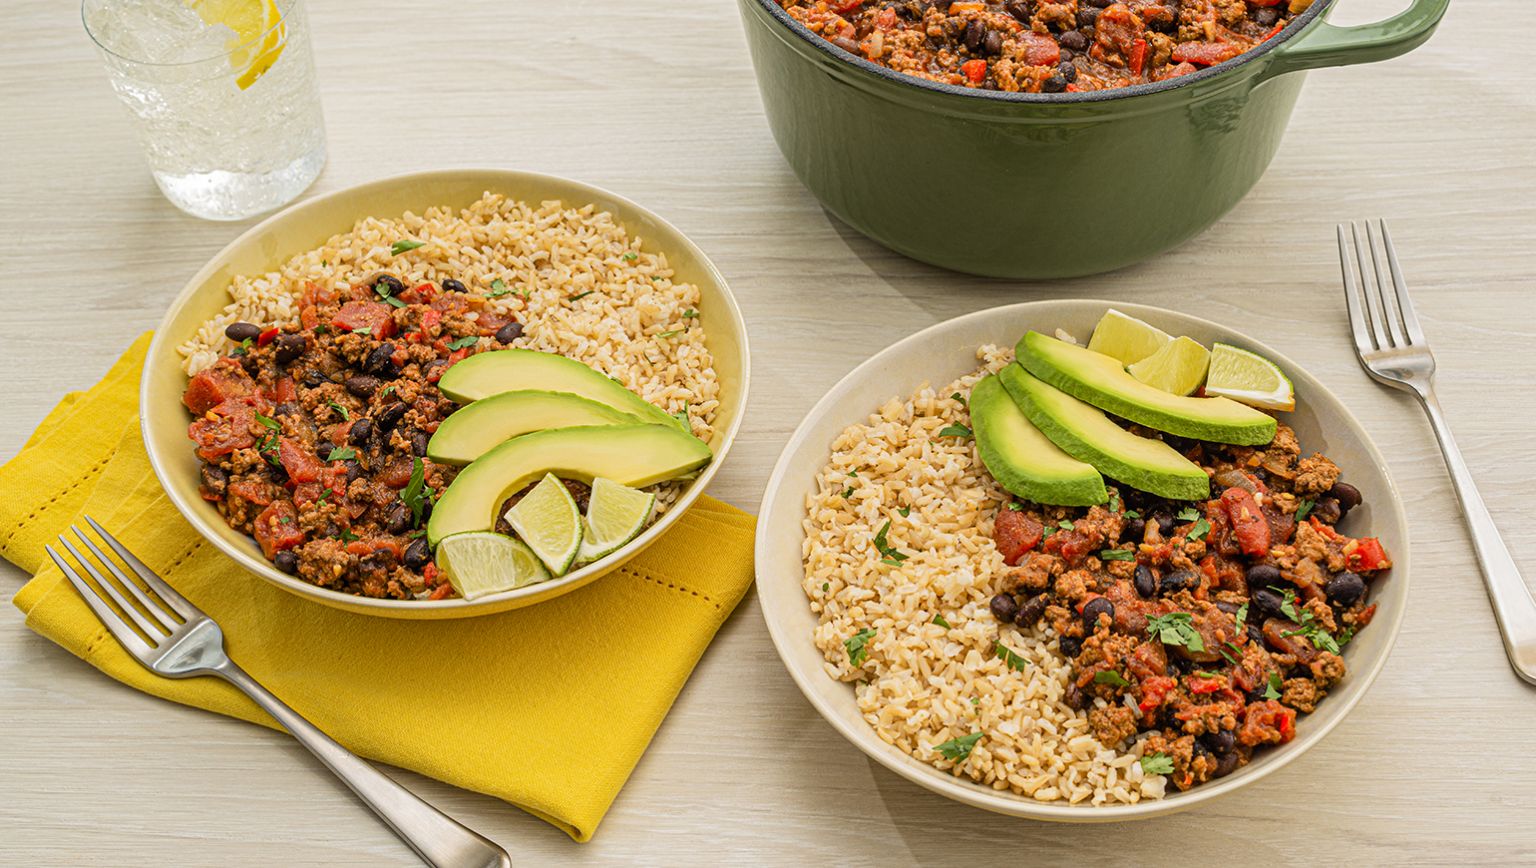 Spicy Turkey & Black Bean Chili with Brown Rice